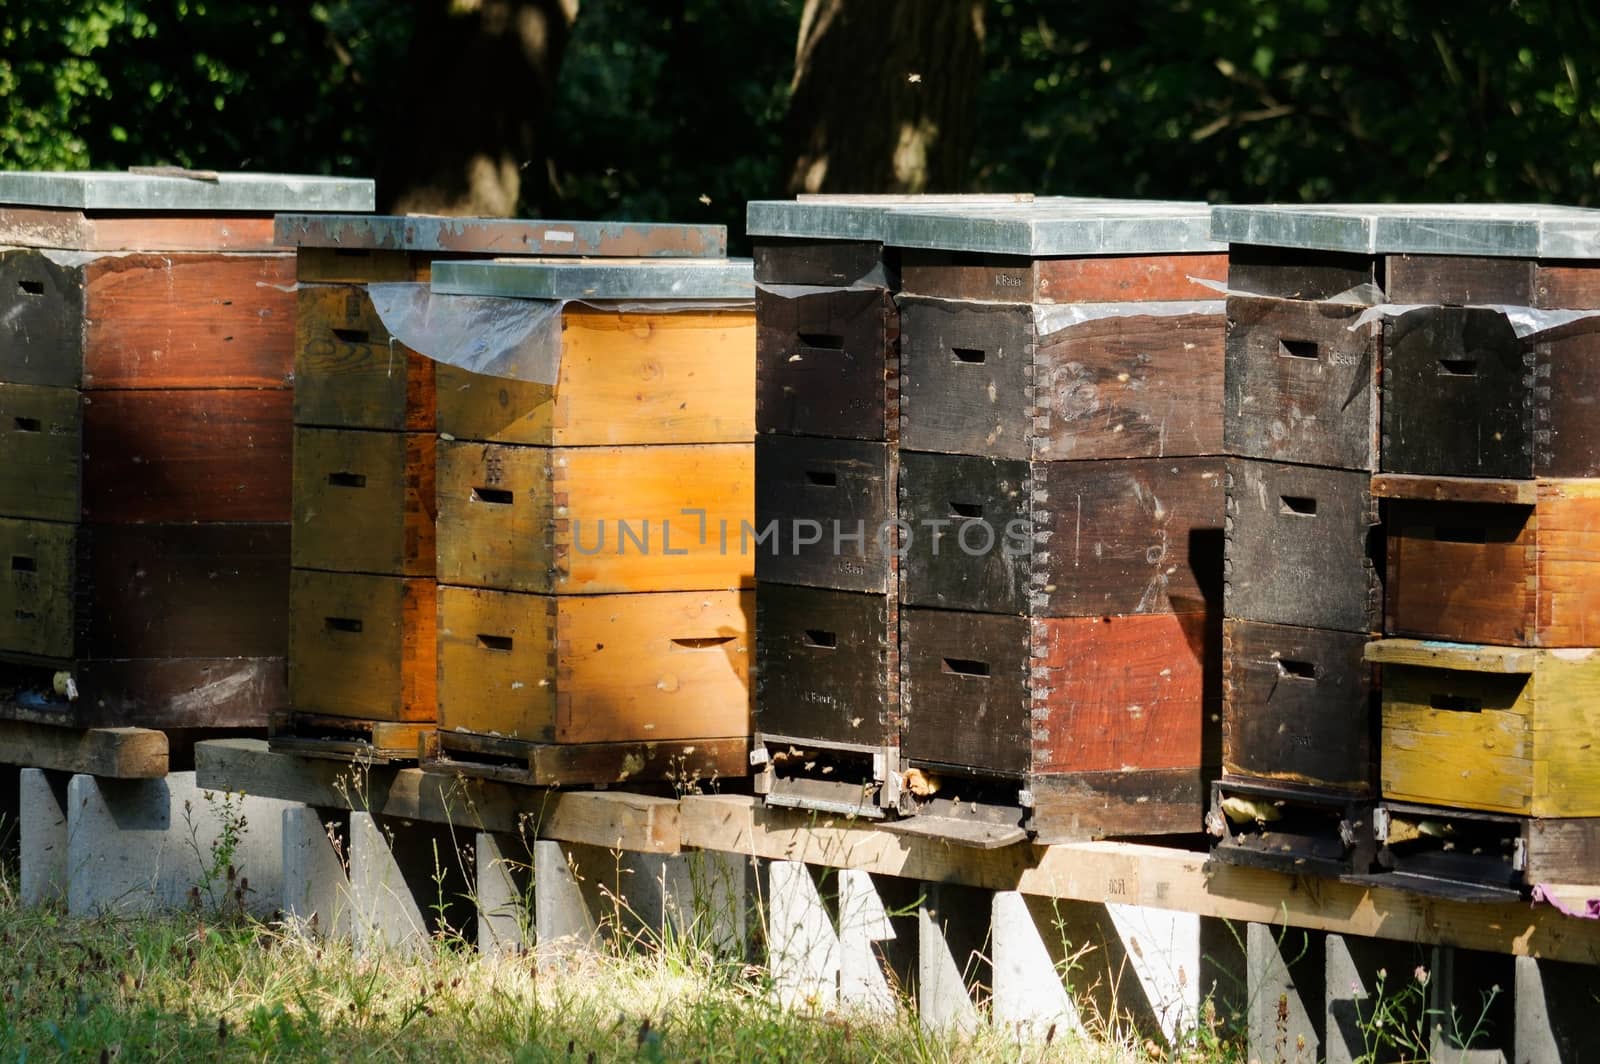 Row of wooden beehives with trees in the background